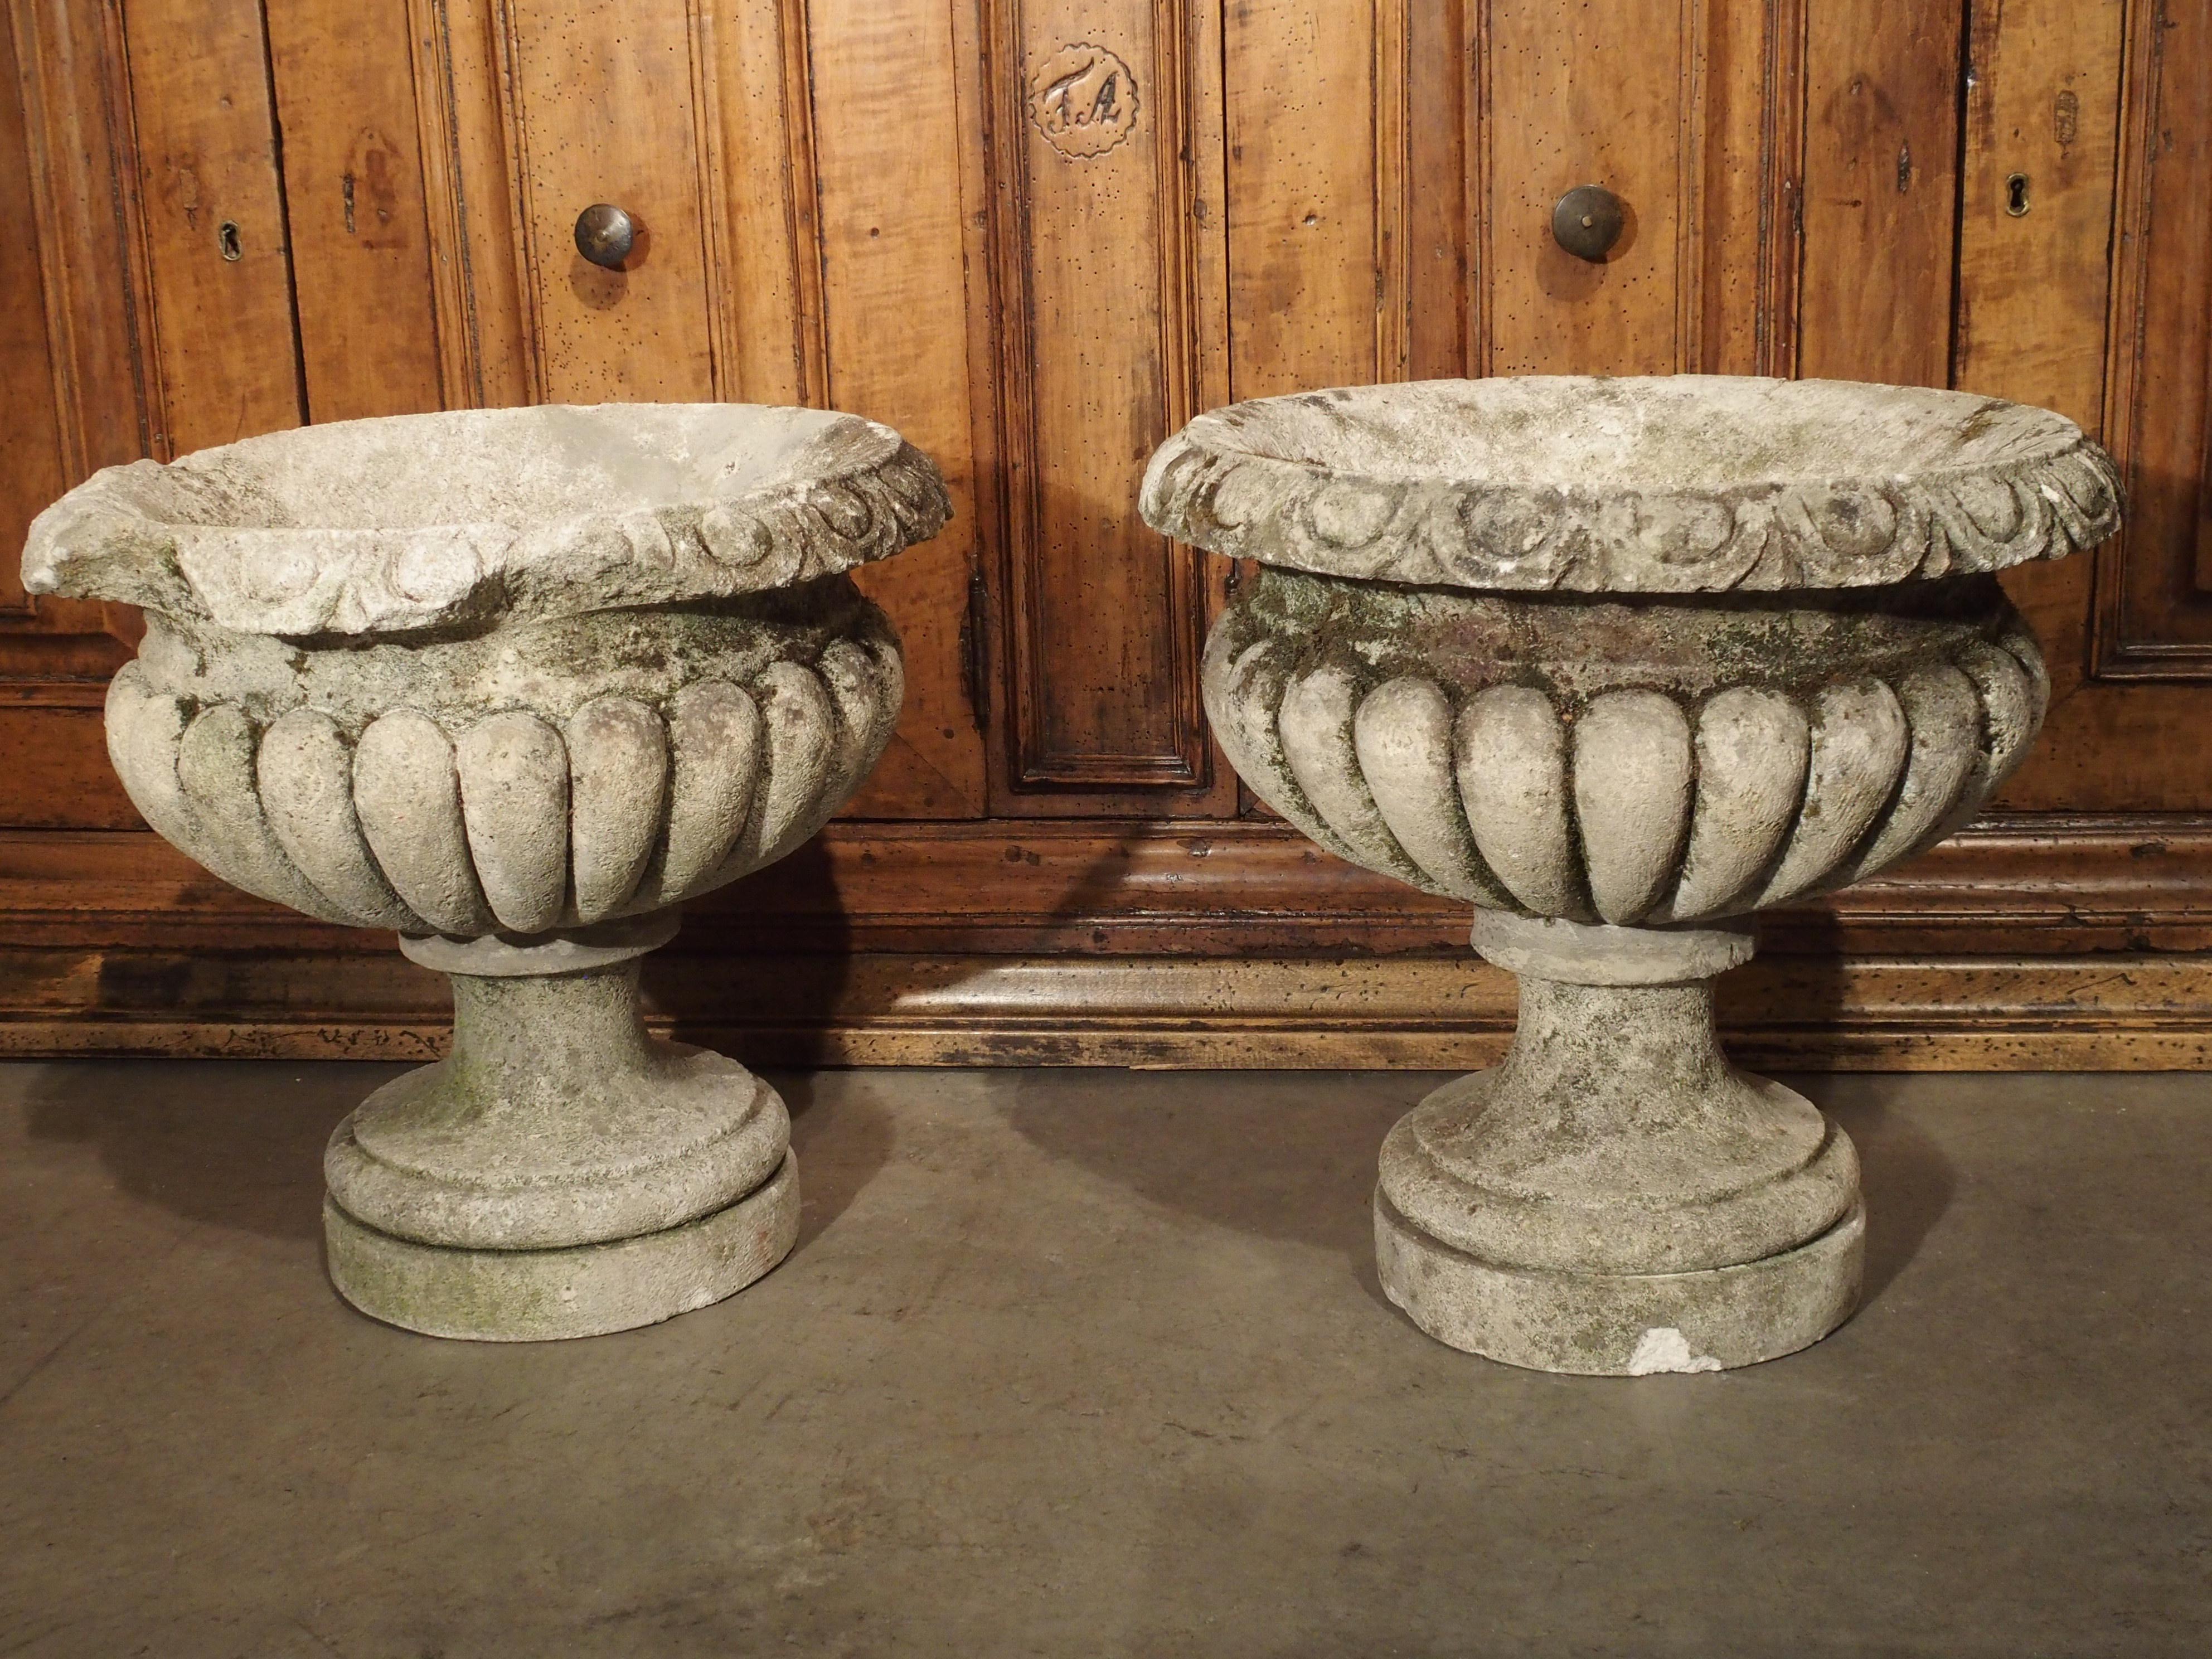 20th Century Carved Vicenza Stone Vases from Italy, circa 1900